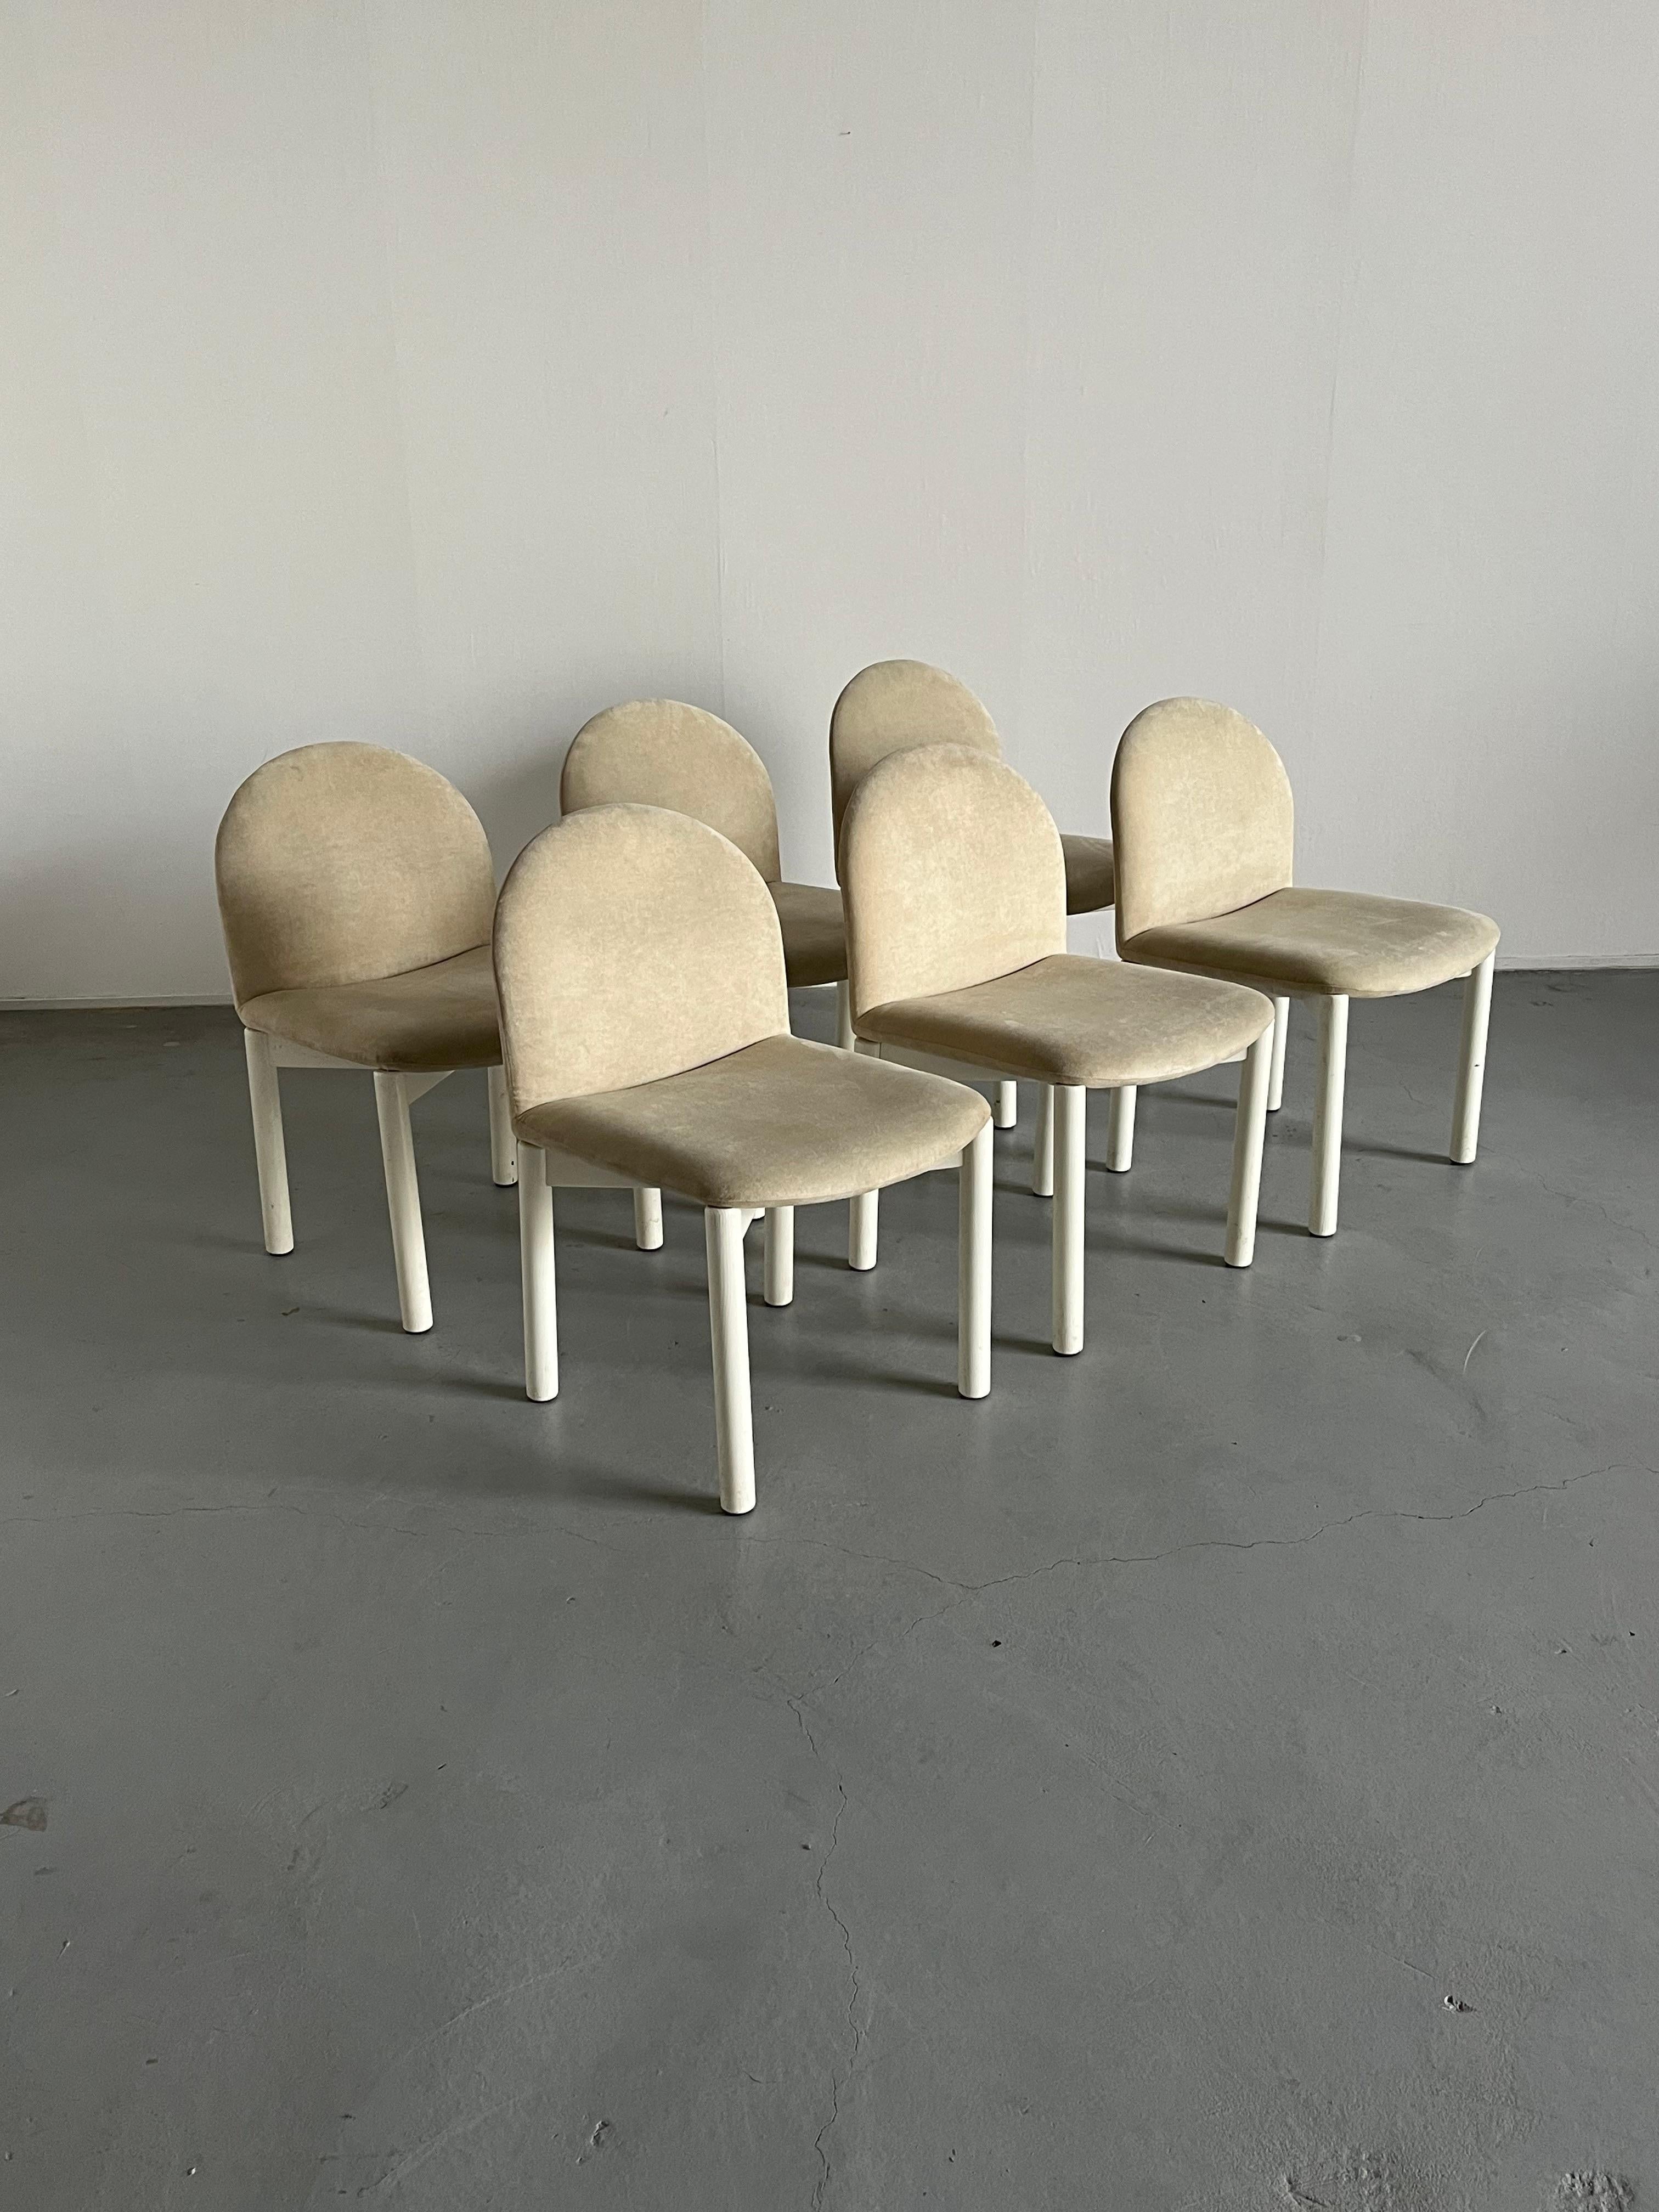 Upholstery Set of 6 Mid-Century Modern 'Combra' Dining Chairs by Cor, 1980s Germany